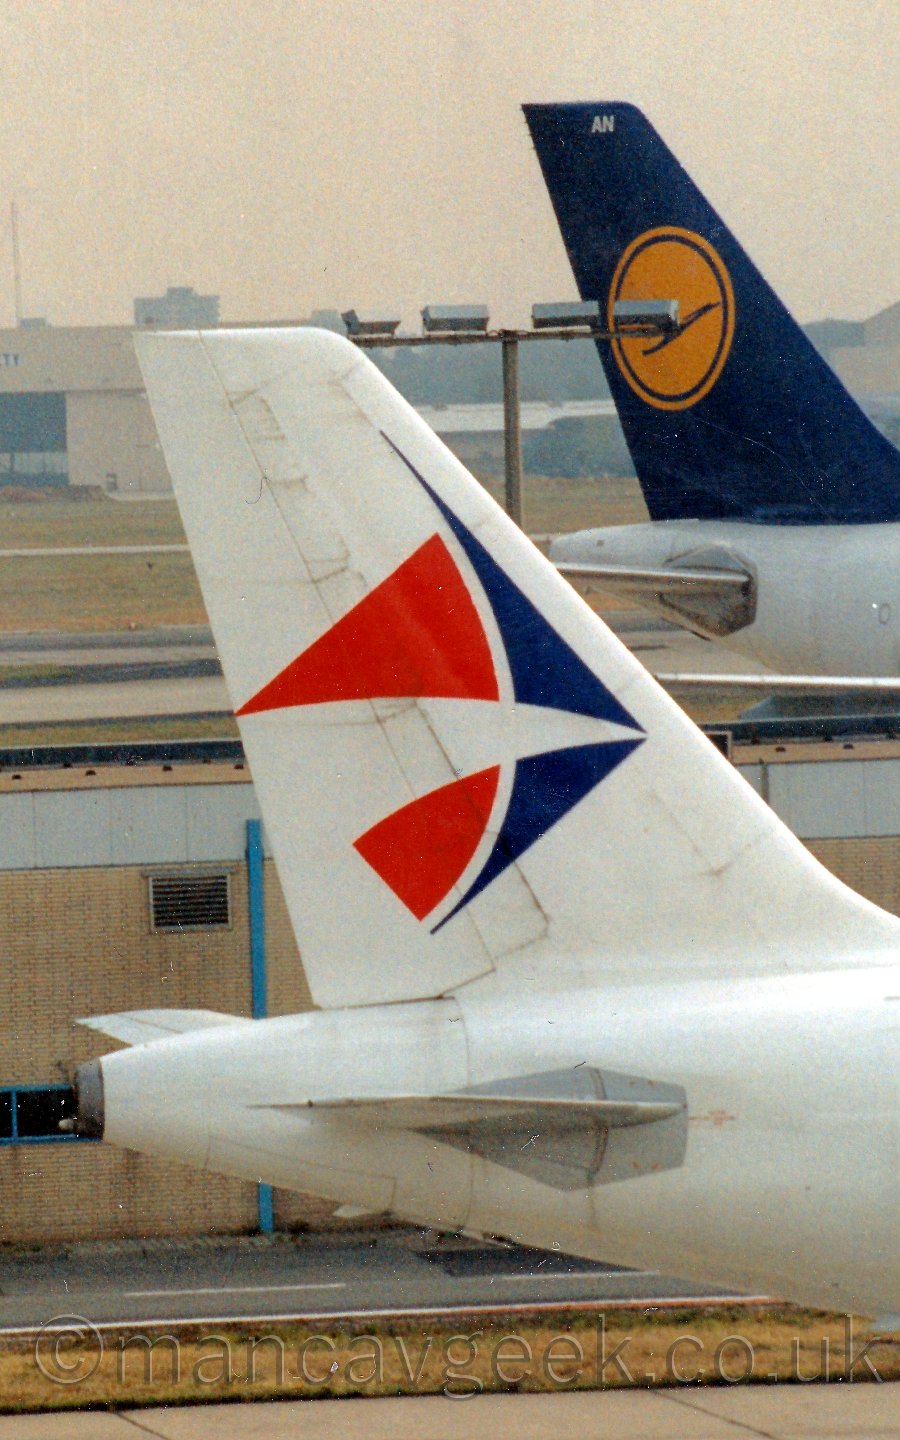 Closeup of the tail of a twin engined jet airliner taxiing from left to right. The plane is mostly white, with a blue and red logo on the tail that is somewhere between a child's kite, and an angel fish. In the background, a low, sandy coloured airport building can be seen, with the back end of a jet airlinervwith a white body and a blue and yellow tail just beyond that. In the far distance, a large white hangar with the doors partially open in the middle, and the words "safety - security" on the upper section, is slowly dissapearing into haze, under a hazy grey sky.